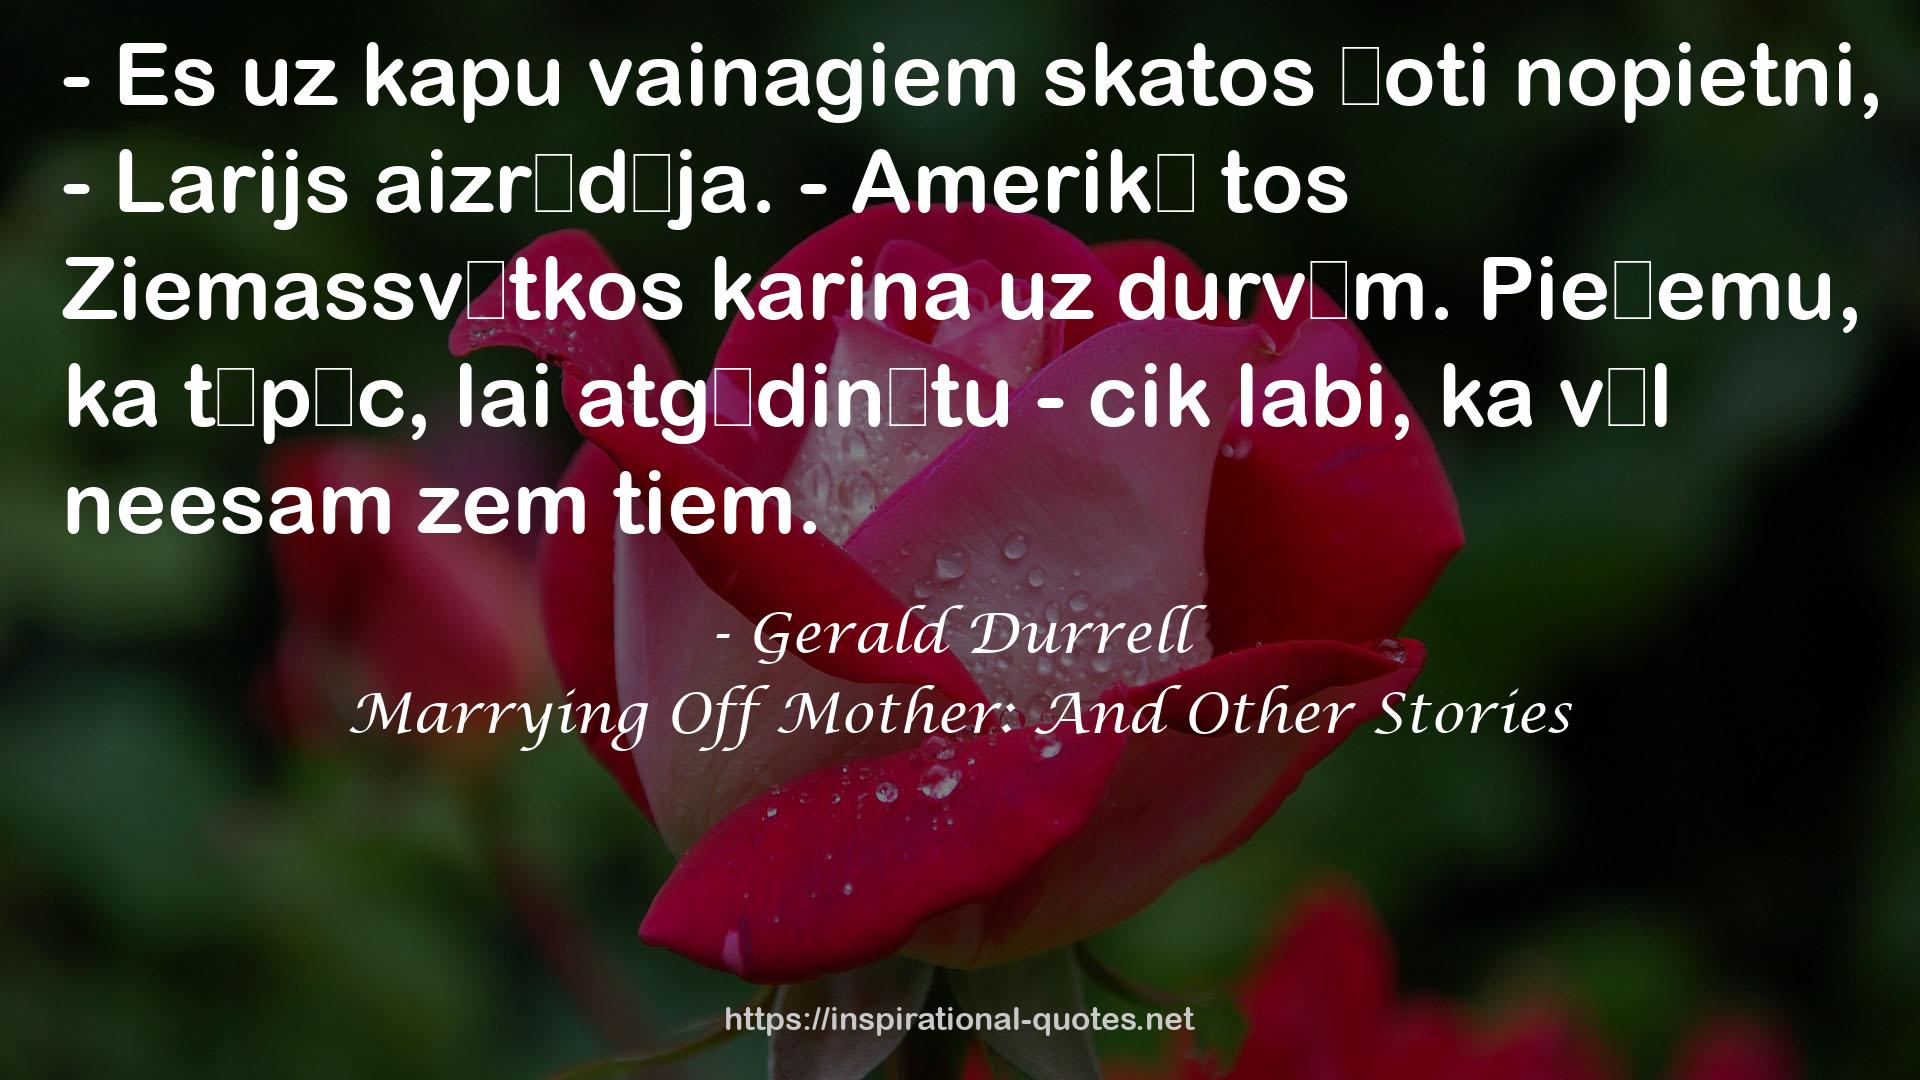 Marrying Off Mother: And Other Stories QUOTES